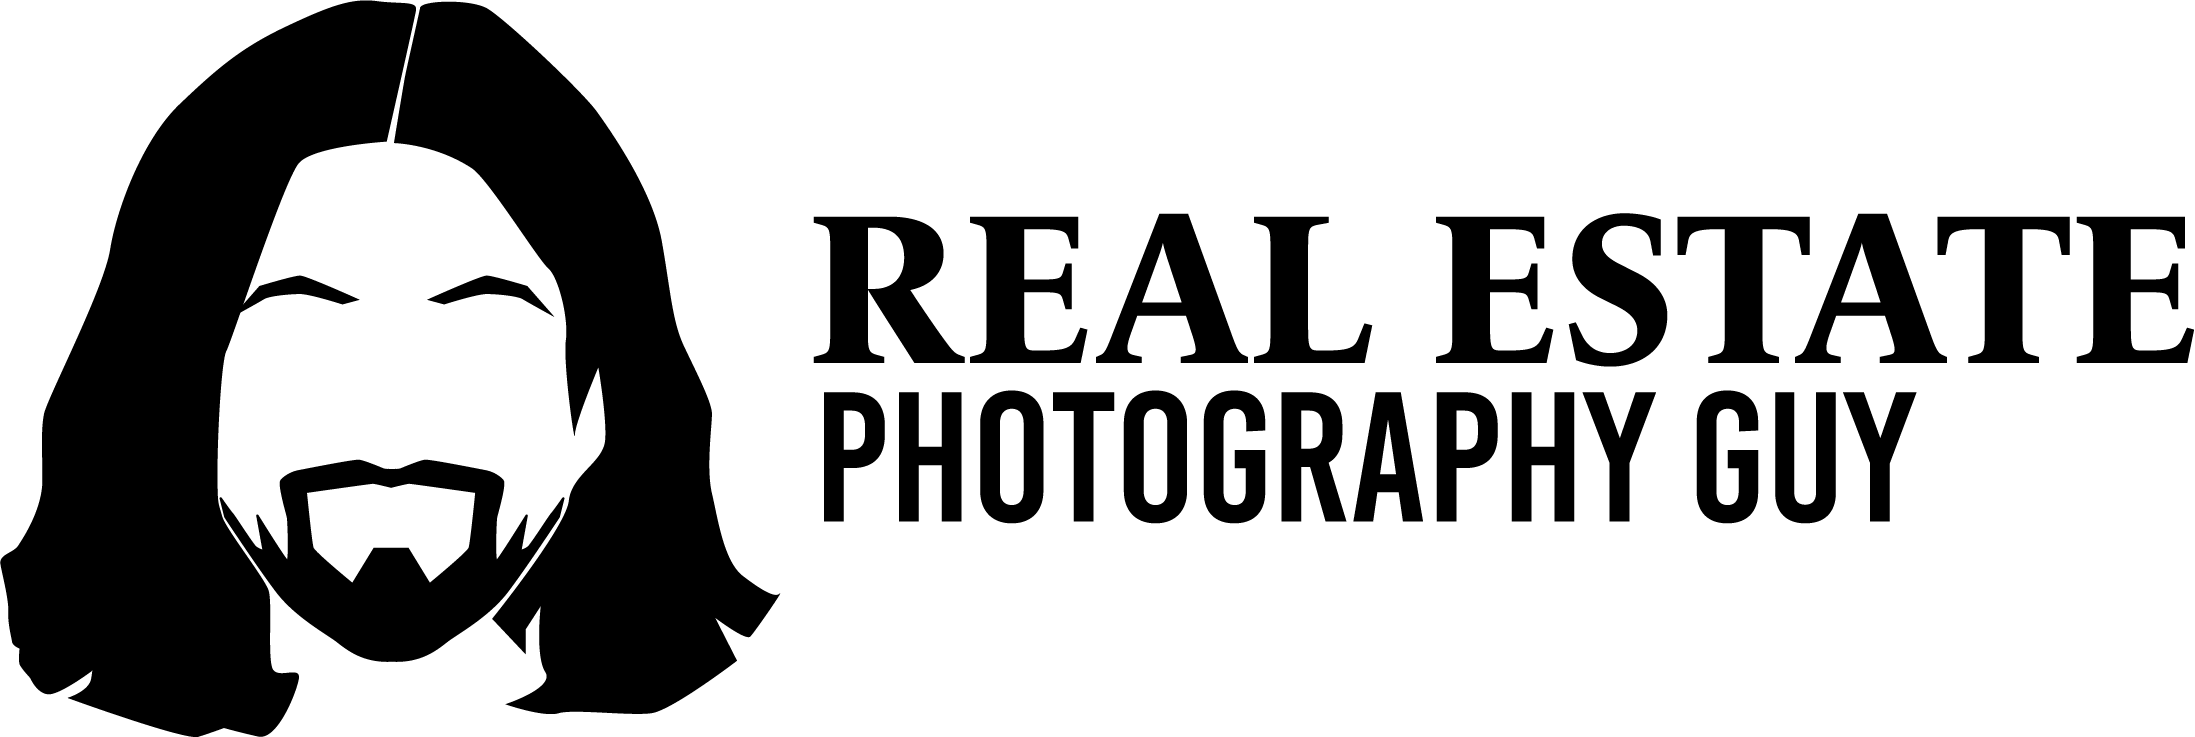 Real Estate Photography Guy